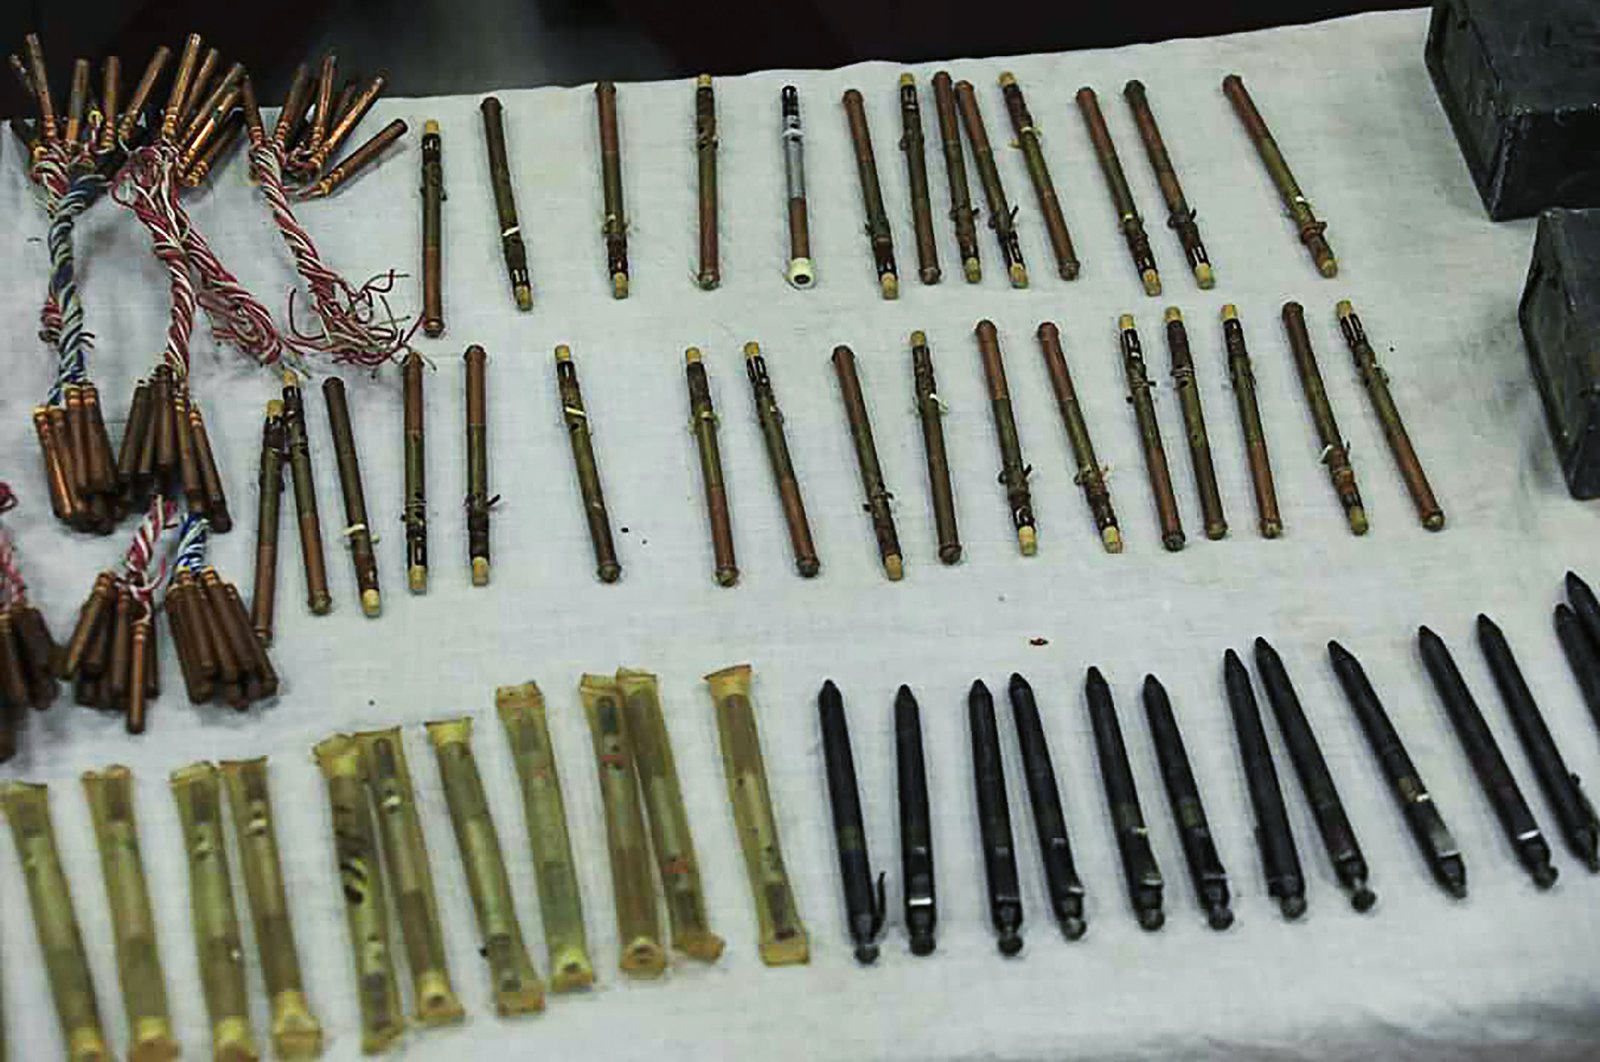 A stash of "pen guns" and sticky bombs are displayed by officials following a police forces operation, in a residential house in Kabul, Afghanistan, Sept. 19, 2020. (Afghanistan's Ministry of Interior Affairs via AFP)